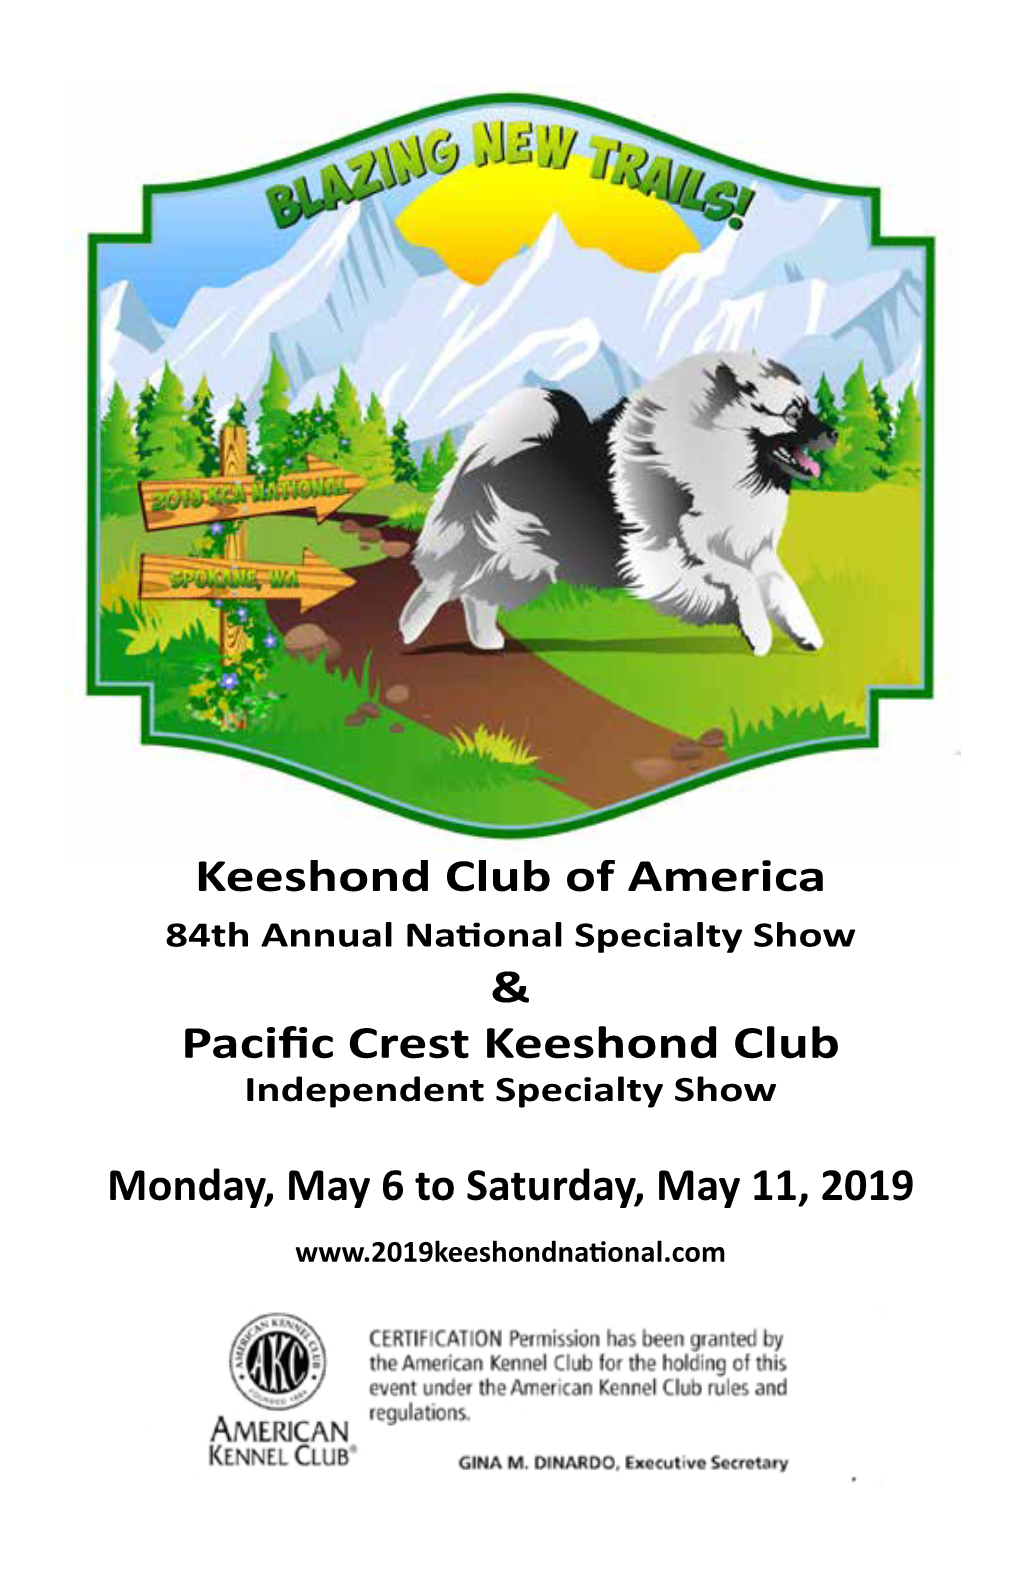 Pacific Crest Keeshond Club Independent Specialty Show